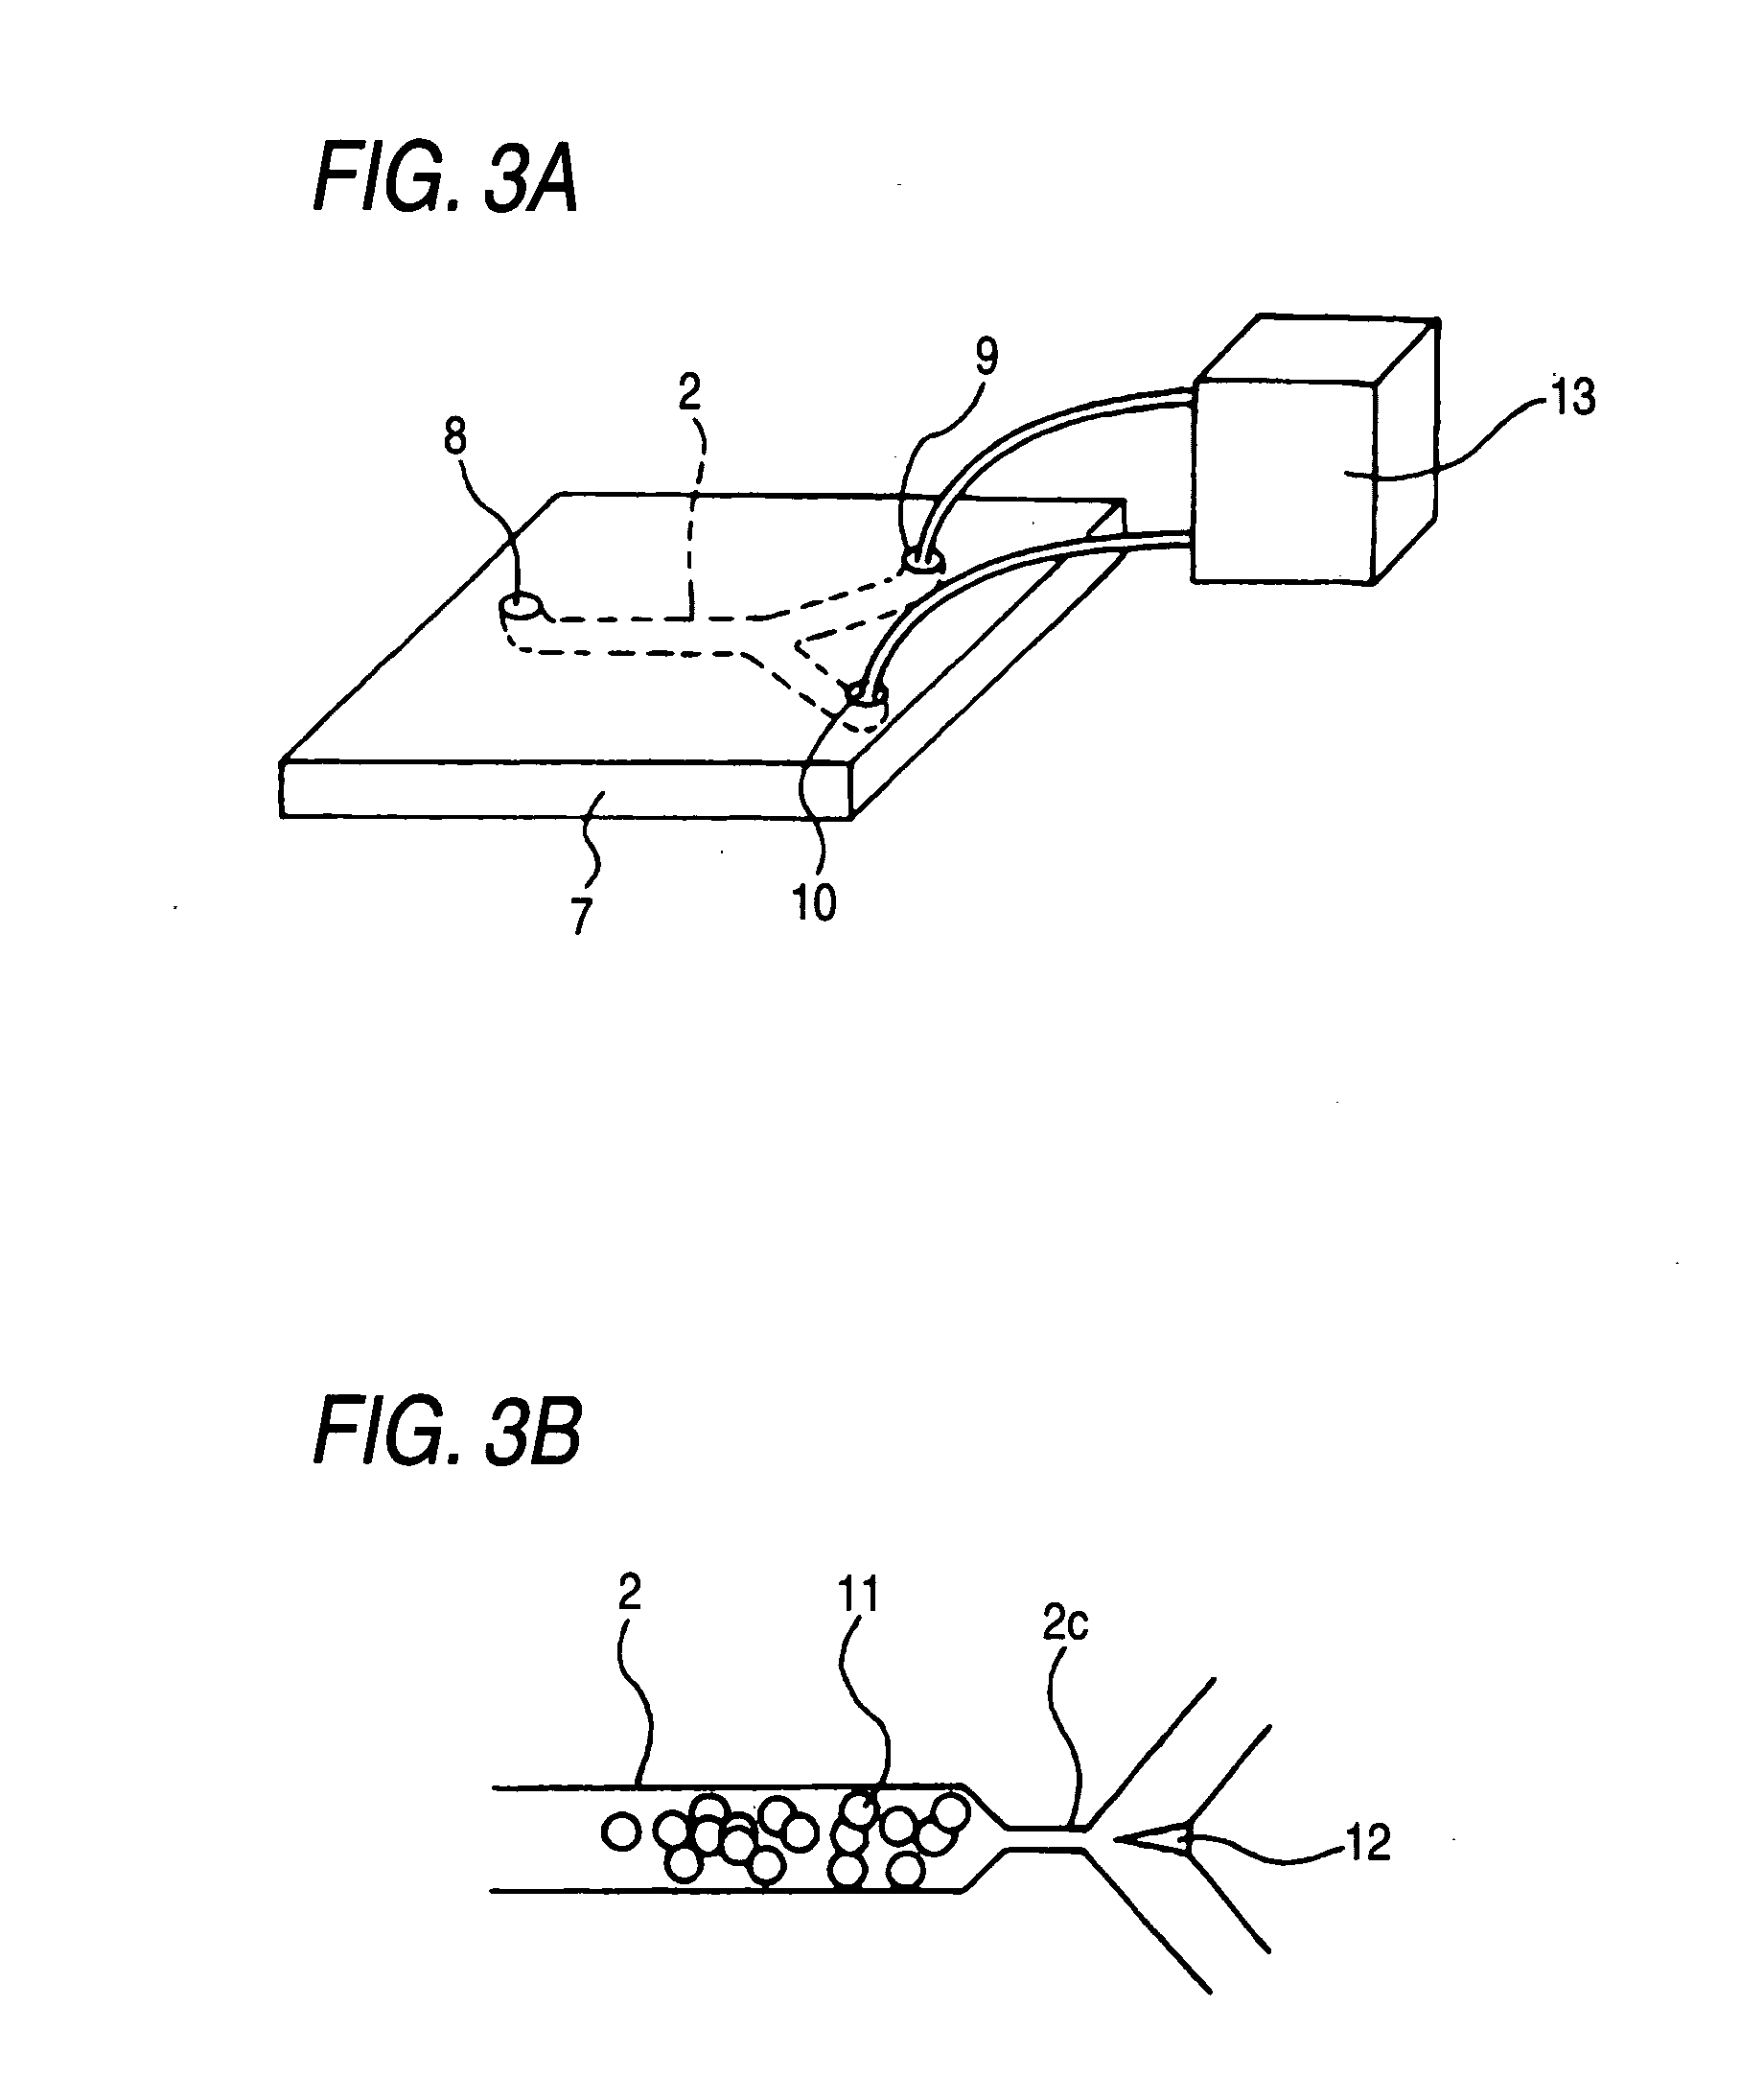 Microdevice for performing method of separating and purifying nucleic acid